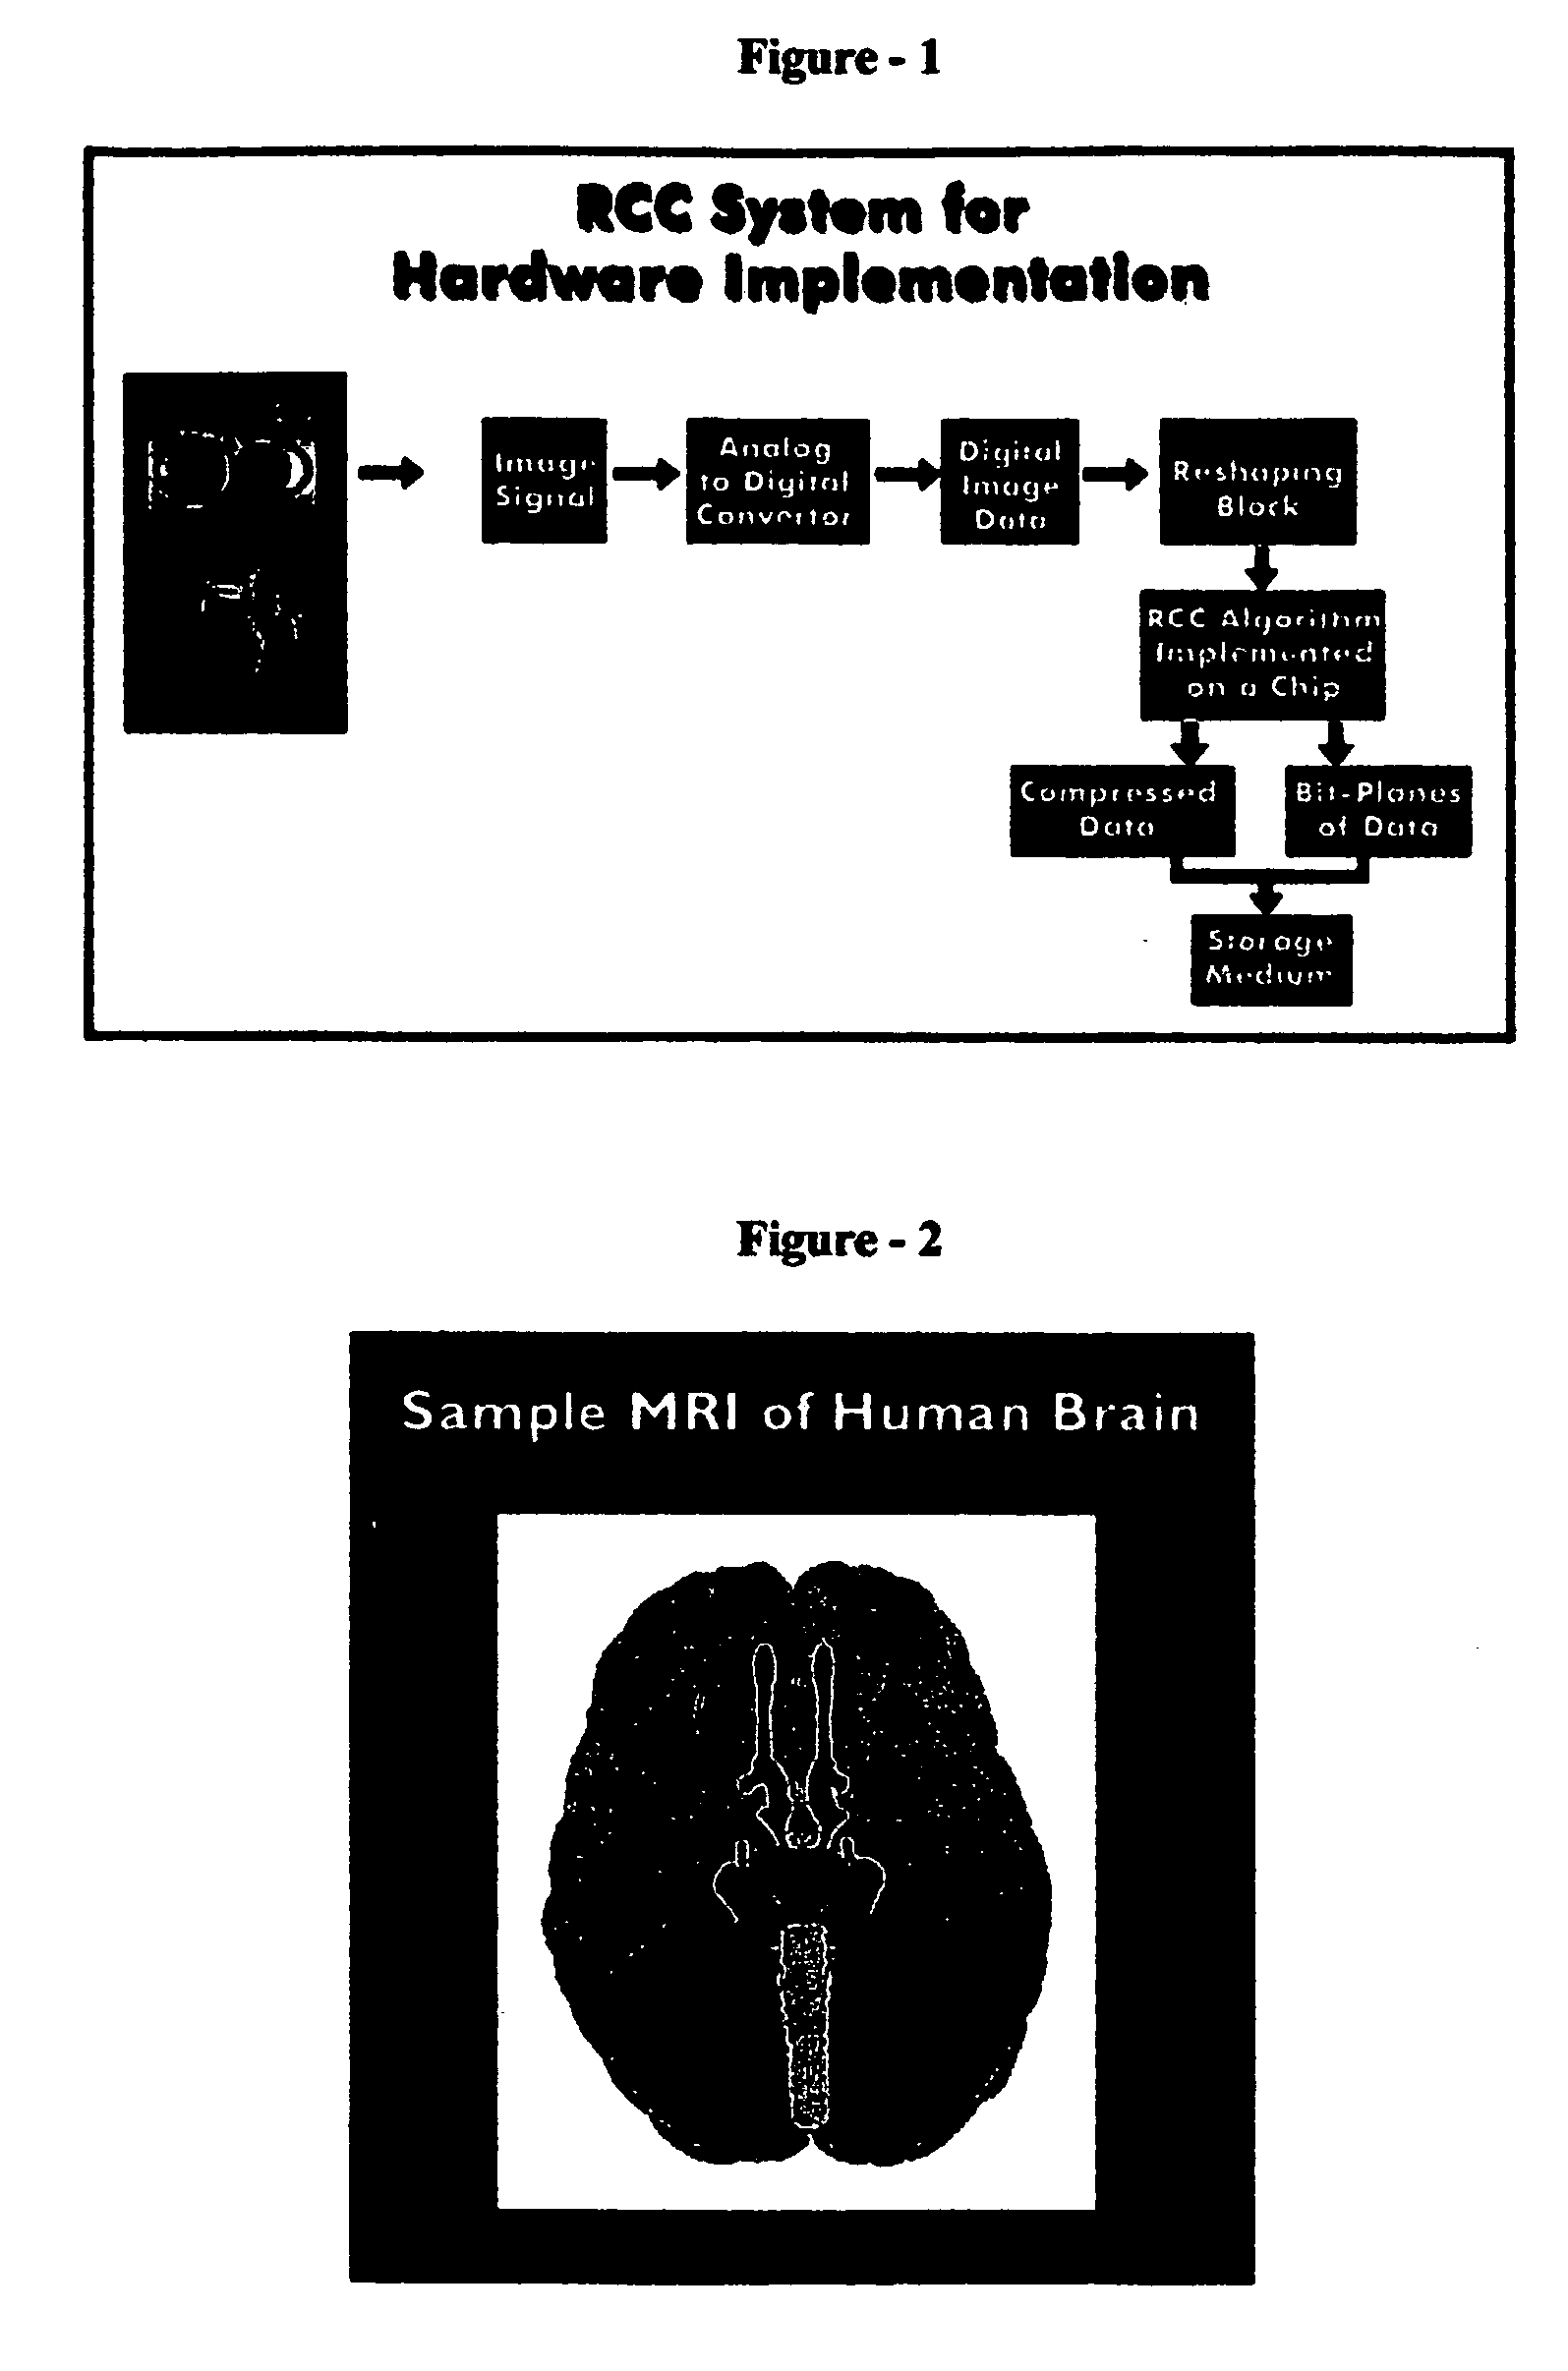 Repetition coded compression for highly correlated image data